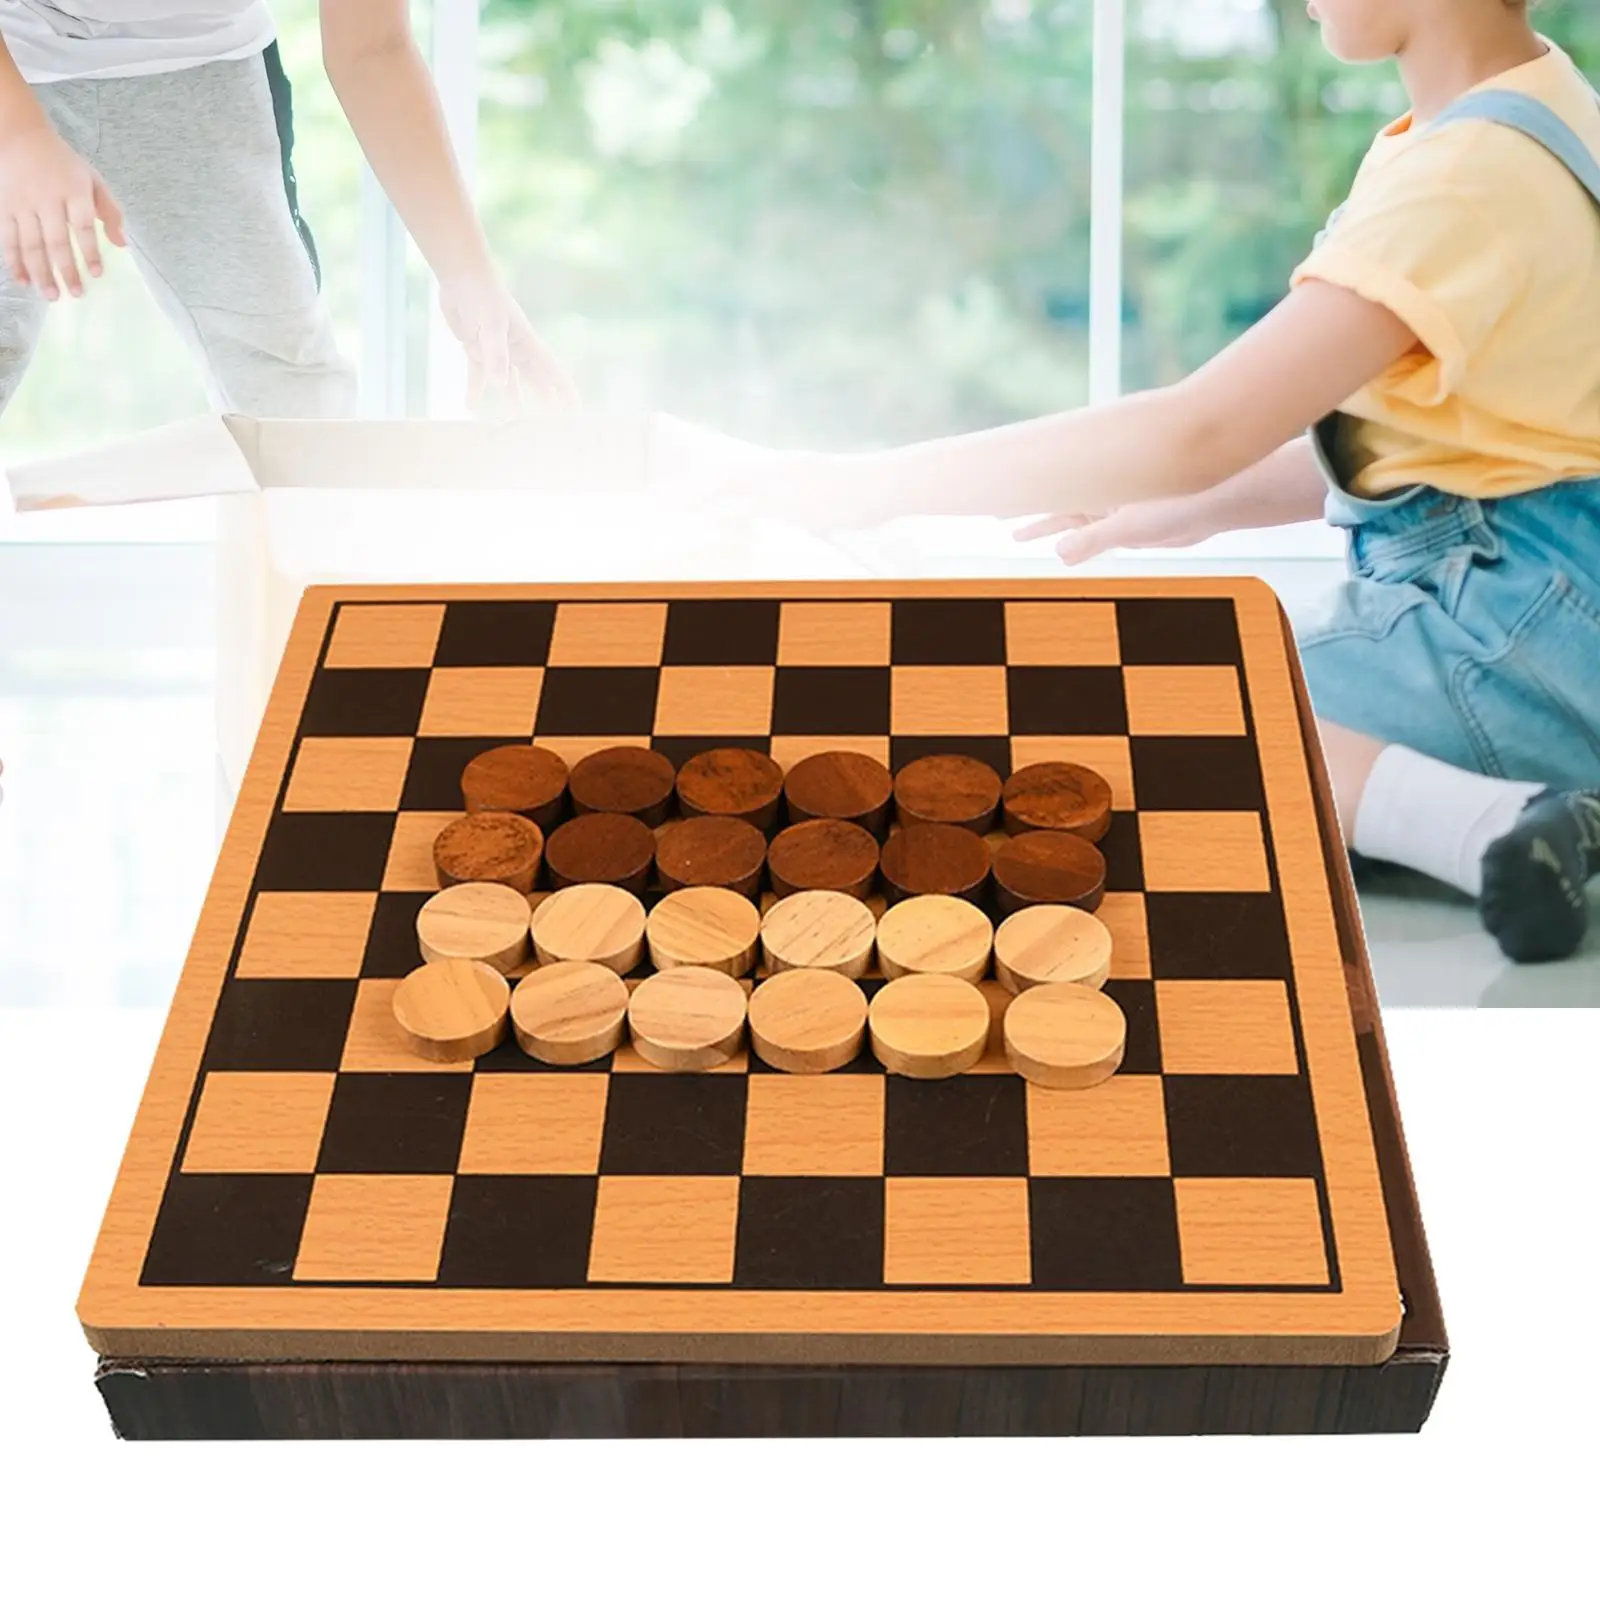 Wooden Chess Game Set Early Education Toys Retro Style Chessmen Chess Pieces for Kids Home Tabletop Traveling Gifts